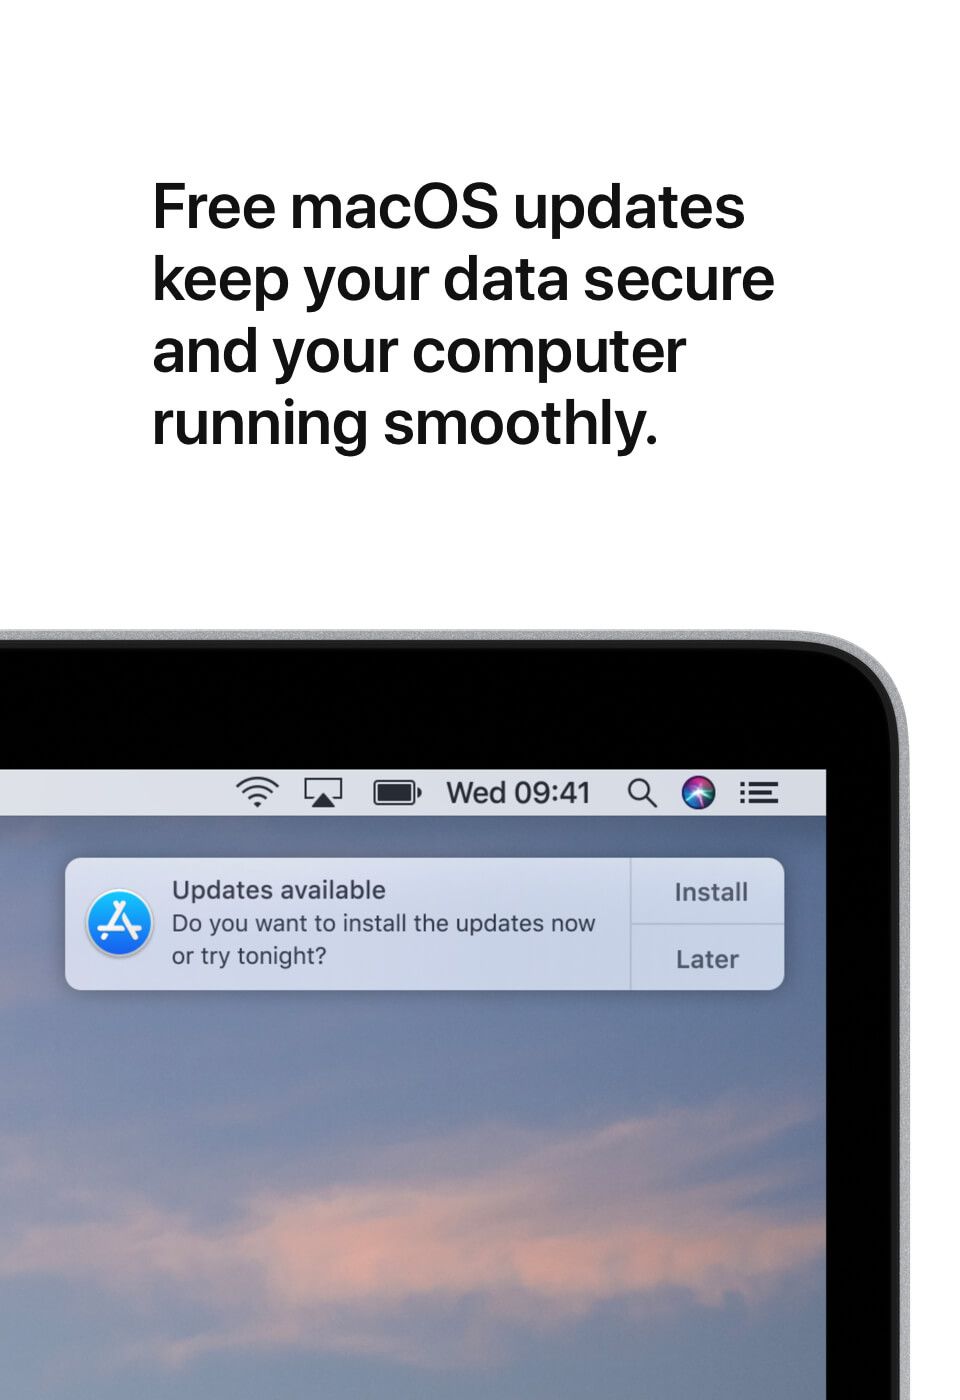 Free macOS updates keep your data secure and your computer running smoothly.